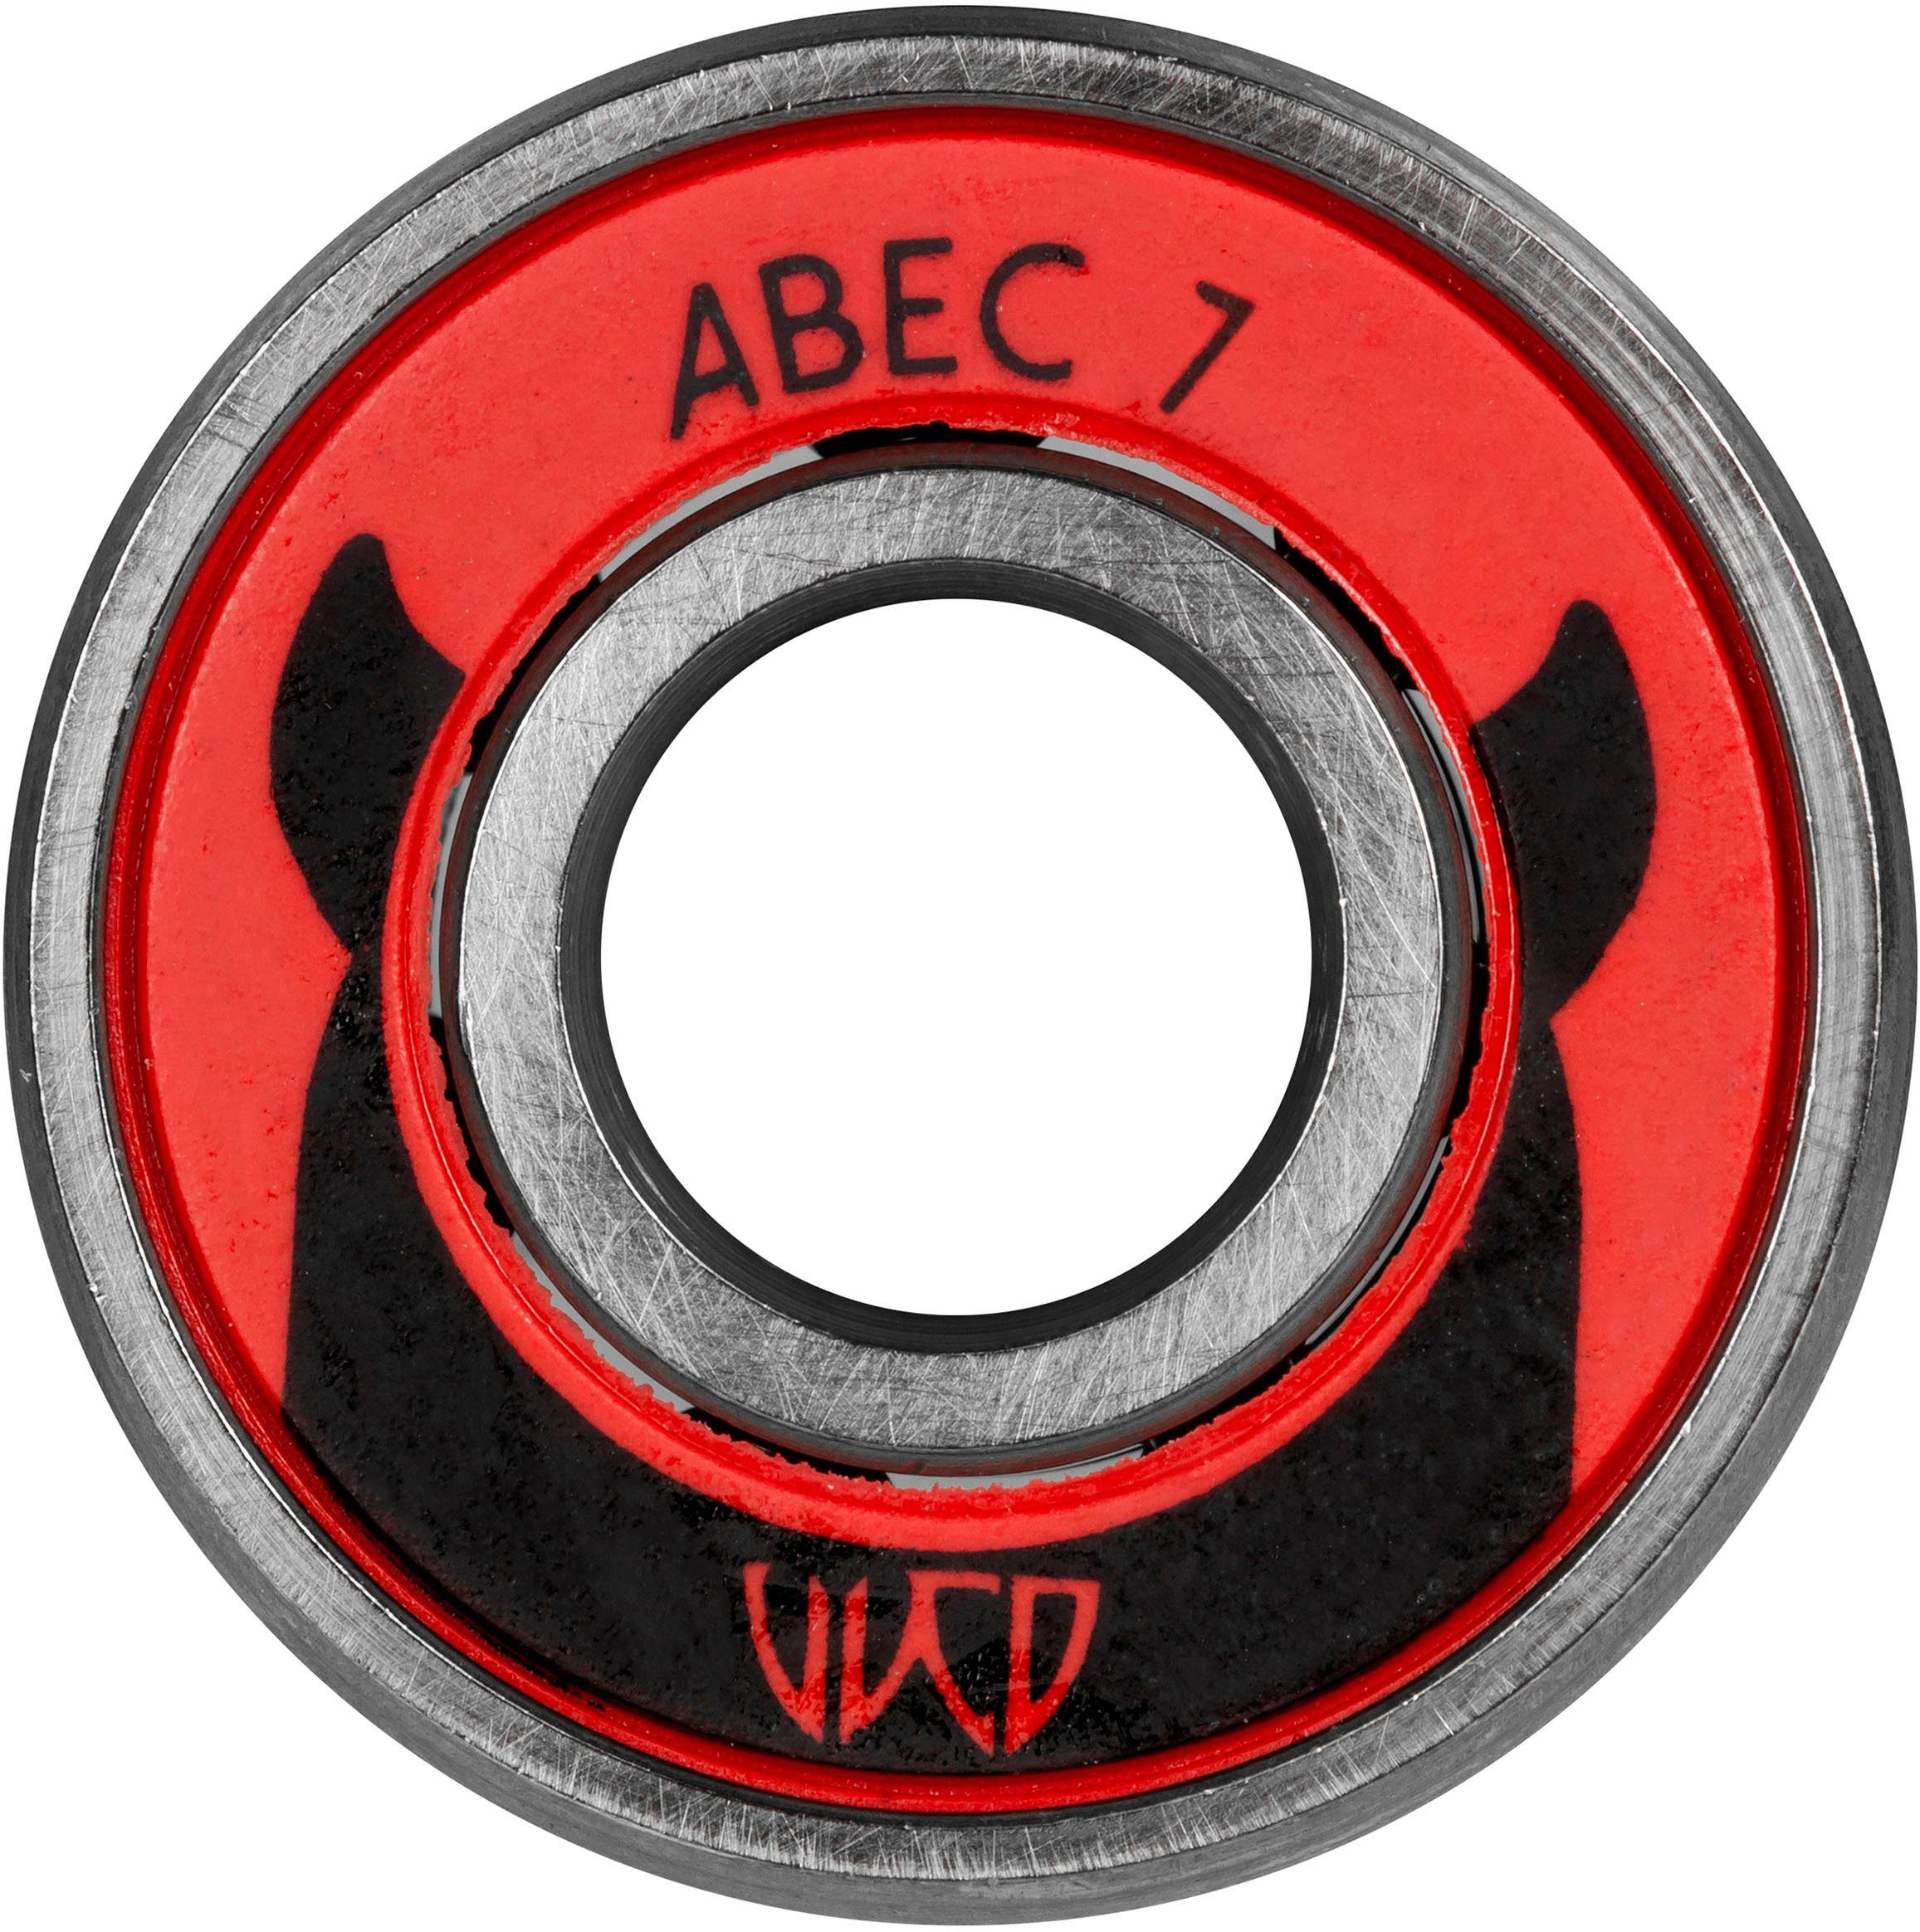 Wicked Kugellager ABEC 7 Freespin - 16-pack (Packung, 16-St)